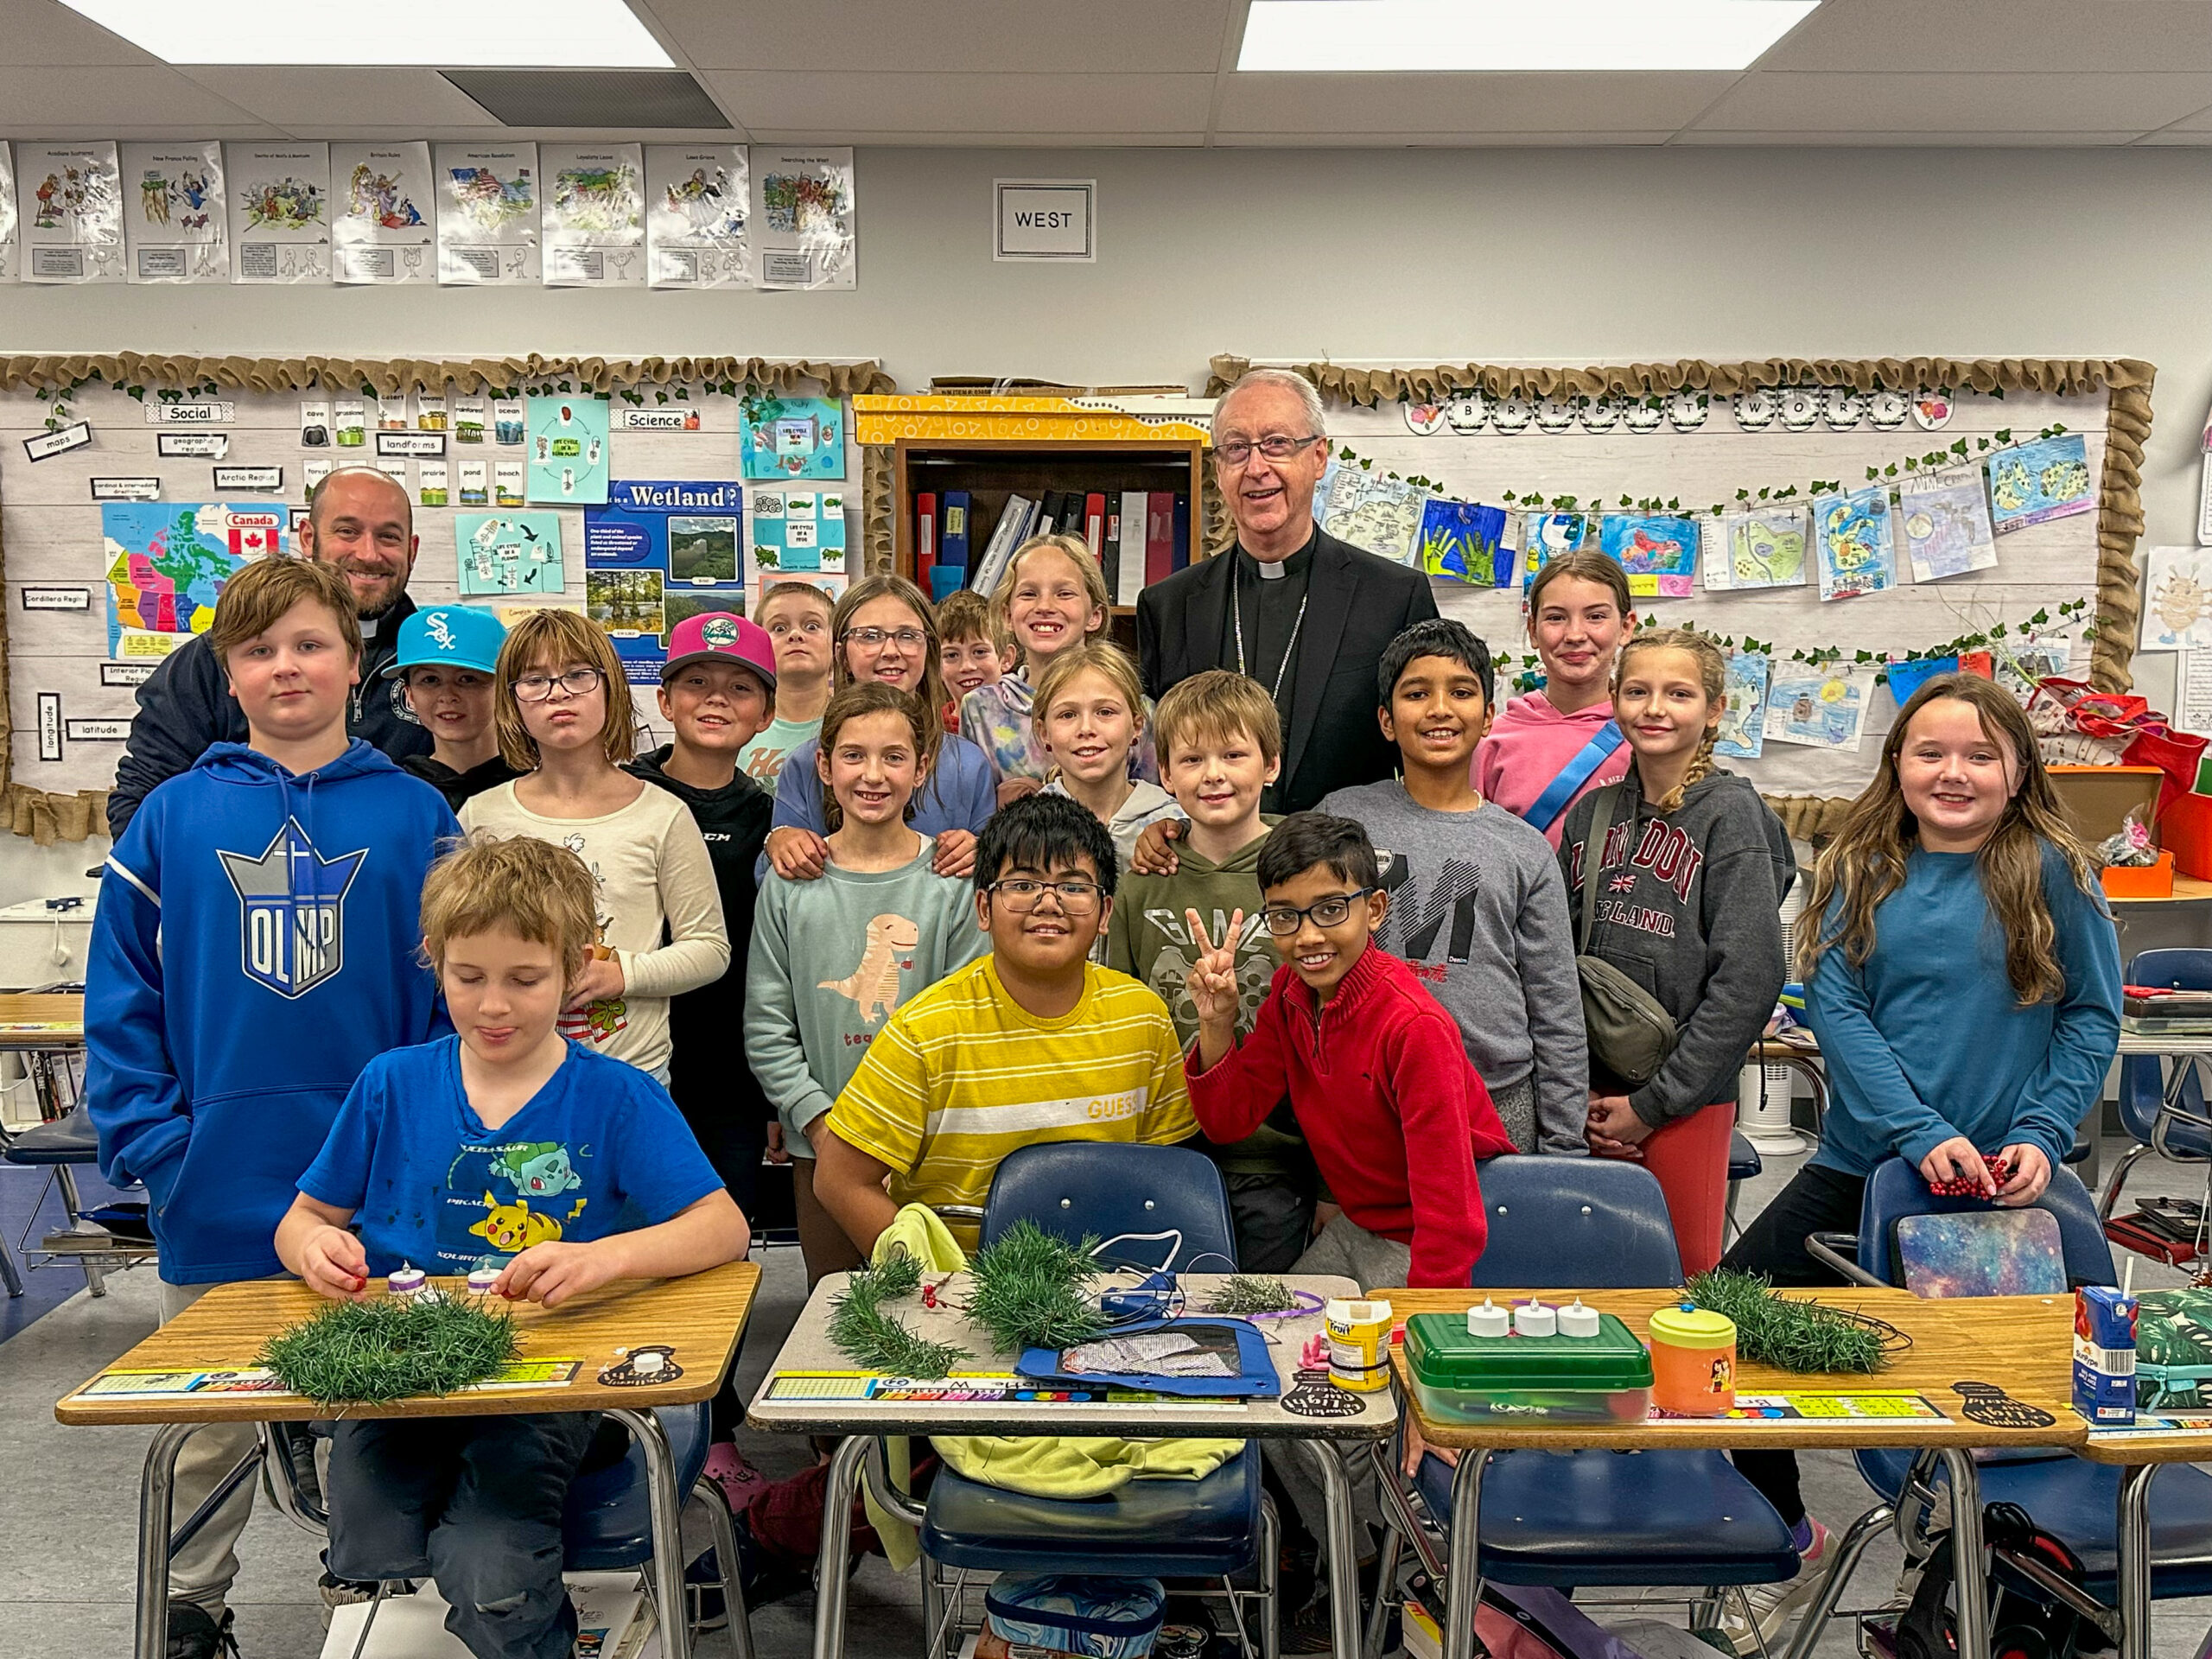 Missionary zeal marks Archbishop Smith's visit to Camrose - caedm